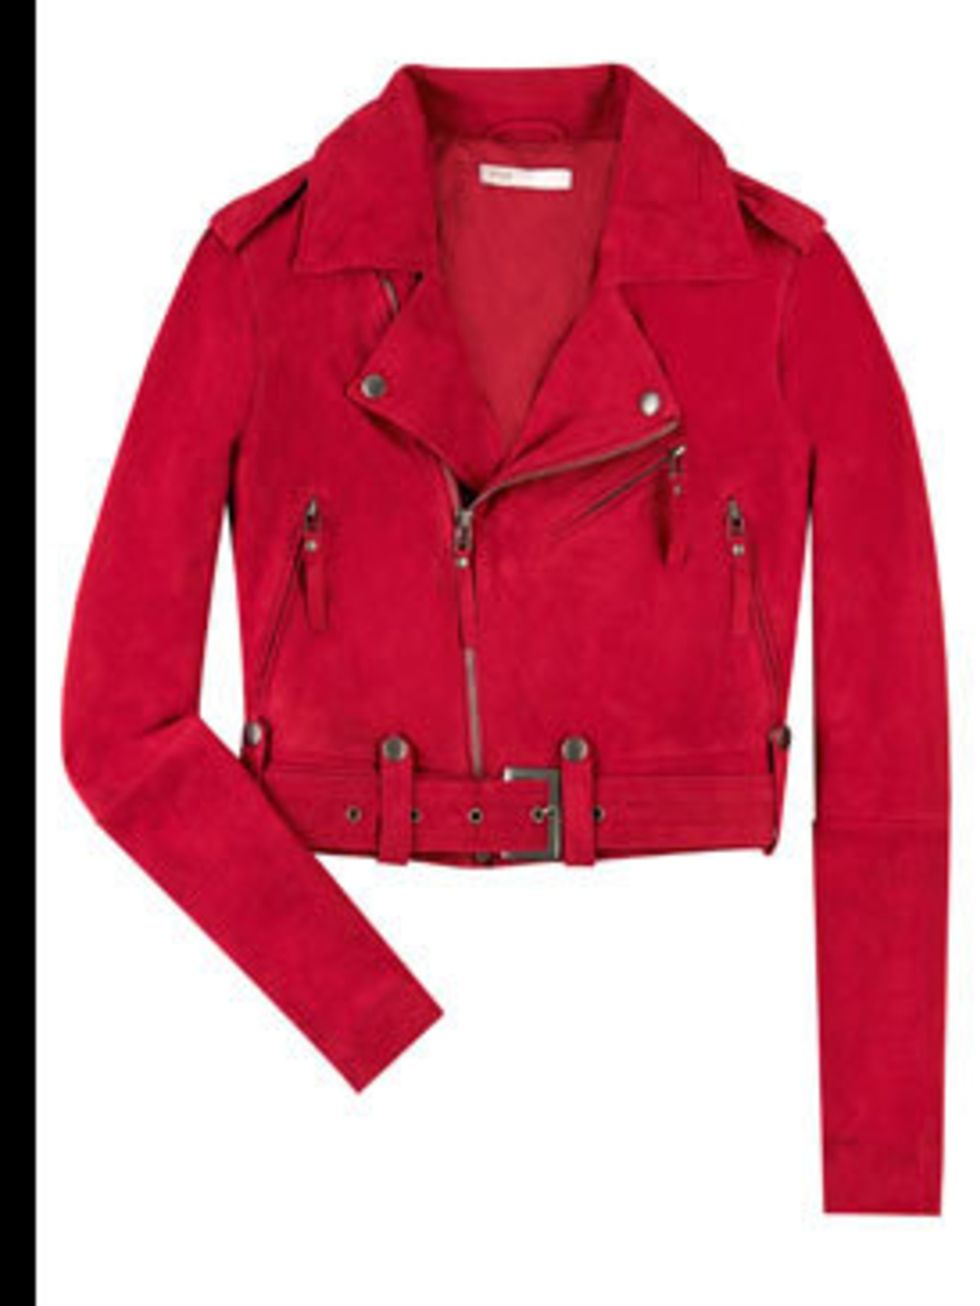 <p>Red suede jacket, £225, by Maje, available at <a href="http://www.net-a-porter.com/product/42213">Net-a-porter.com</a></p>